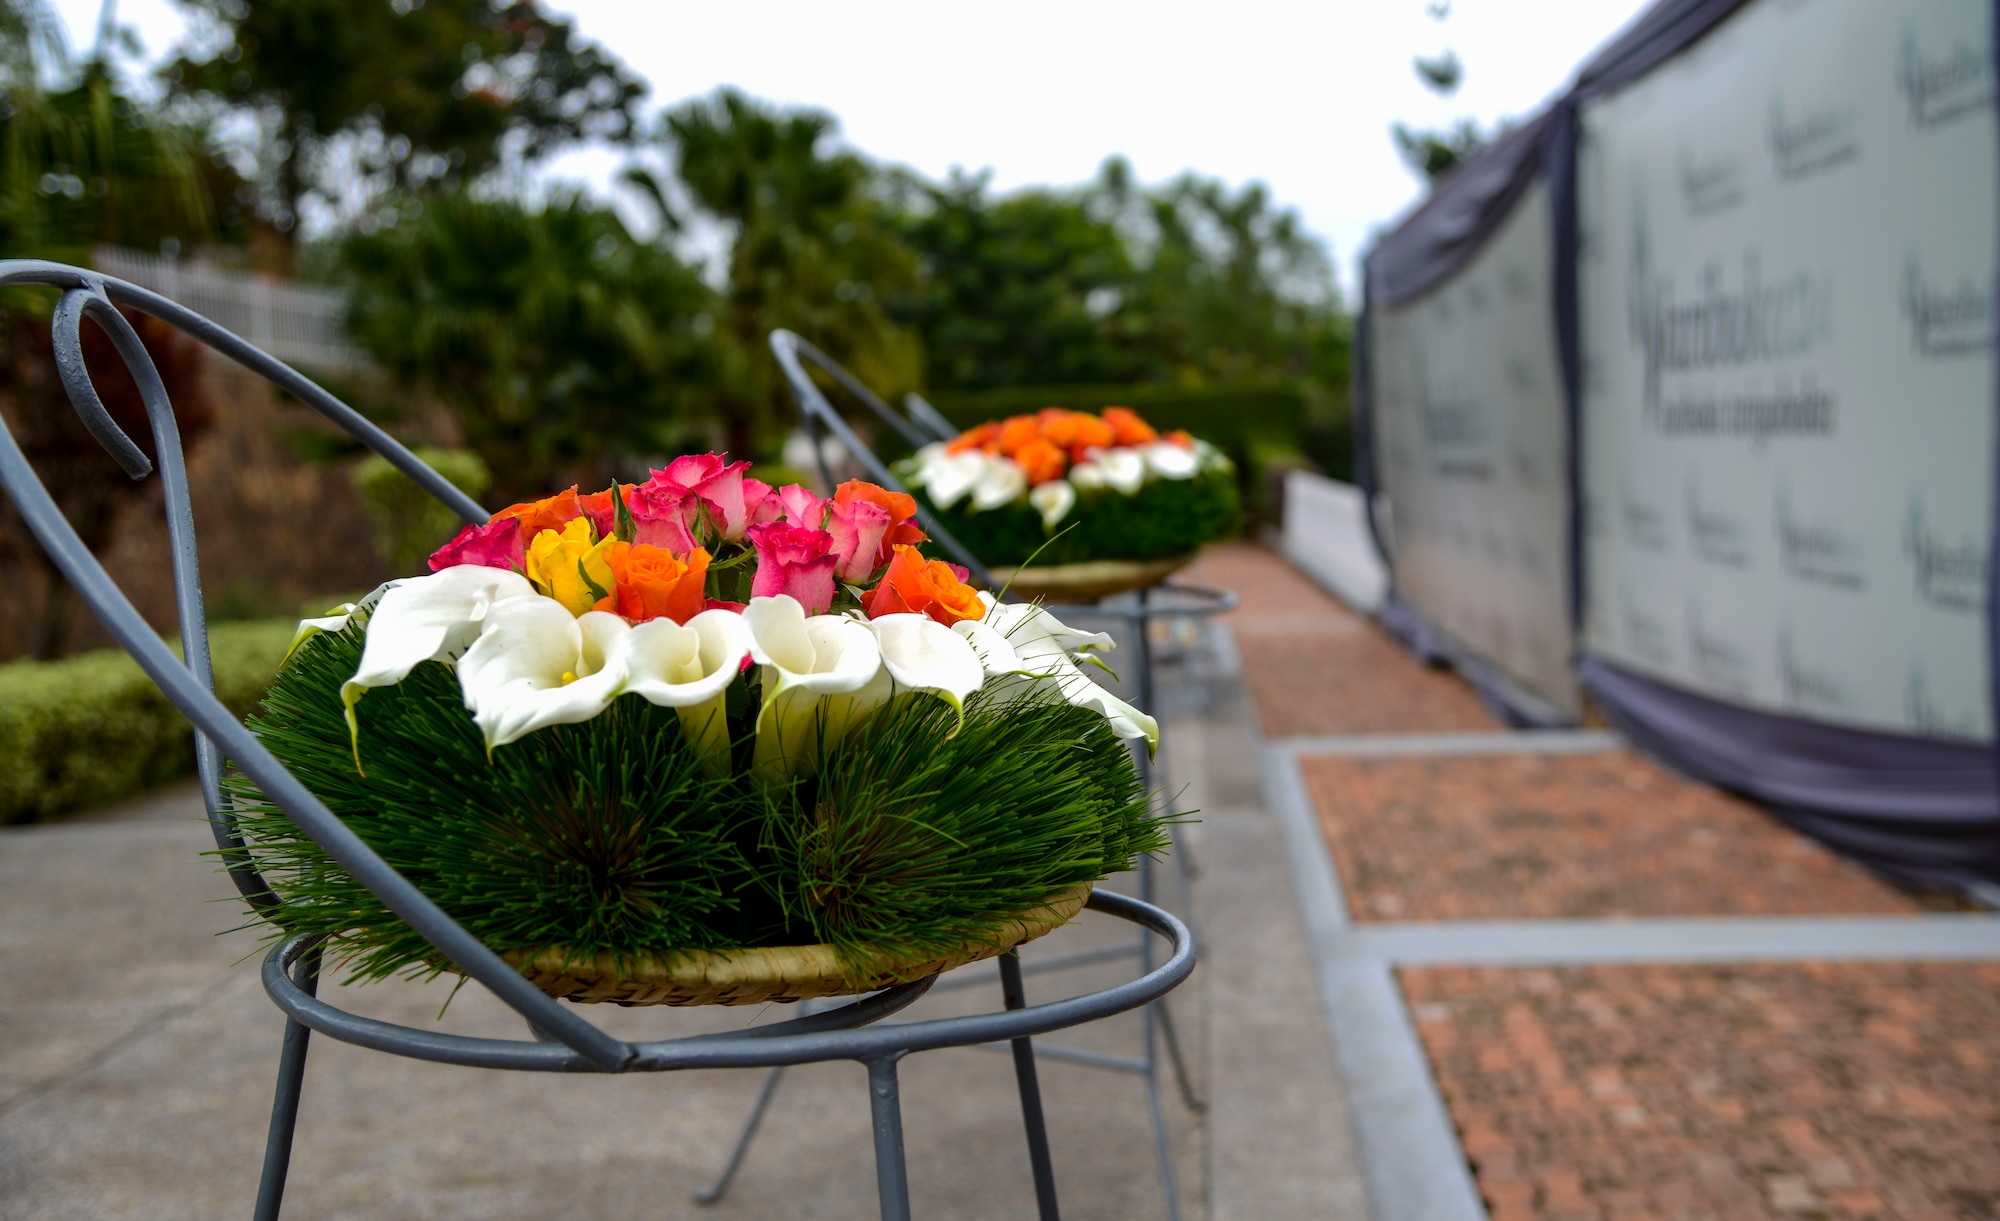 Wreaths rest on stands after a ceremony at the Kigali Genocide Memorial in Kigali, Rwanda, March 4, 2019. Participants in the African Partnership Flight Rwanda took part in the wreath laying ceremony as part of a cultural visit as well as to pay their respects to the approximately 250,000 victims buried there. (U.S. Air Force photo by Tech. Sgt. Timothy Moore)